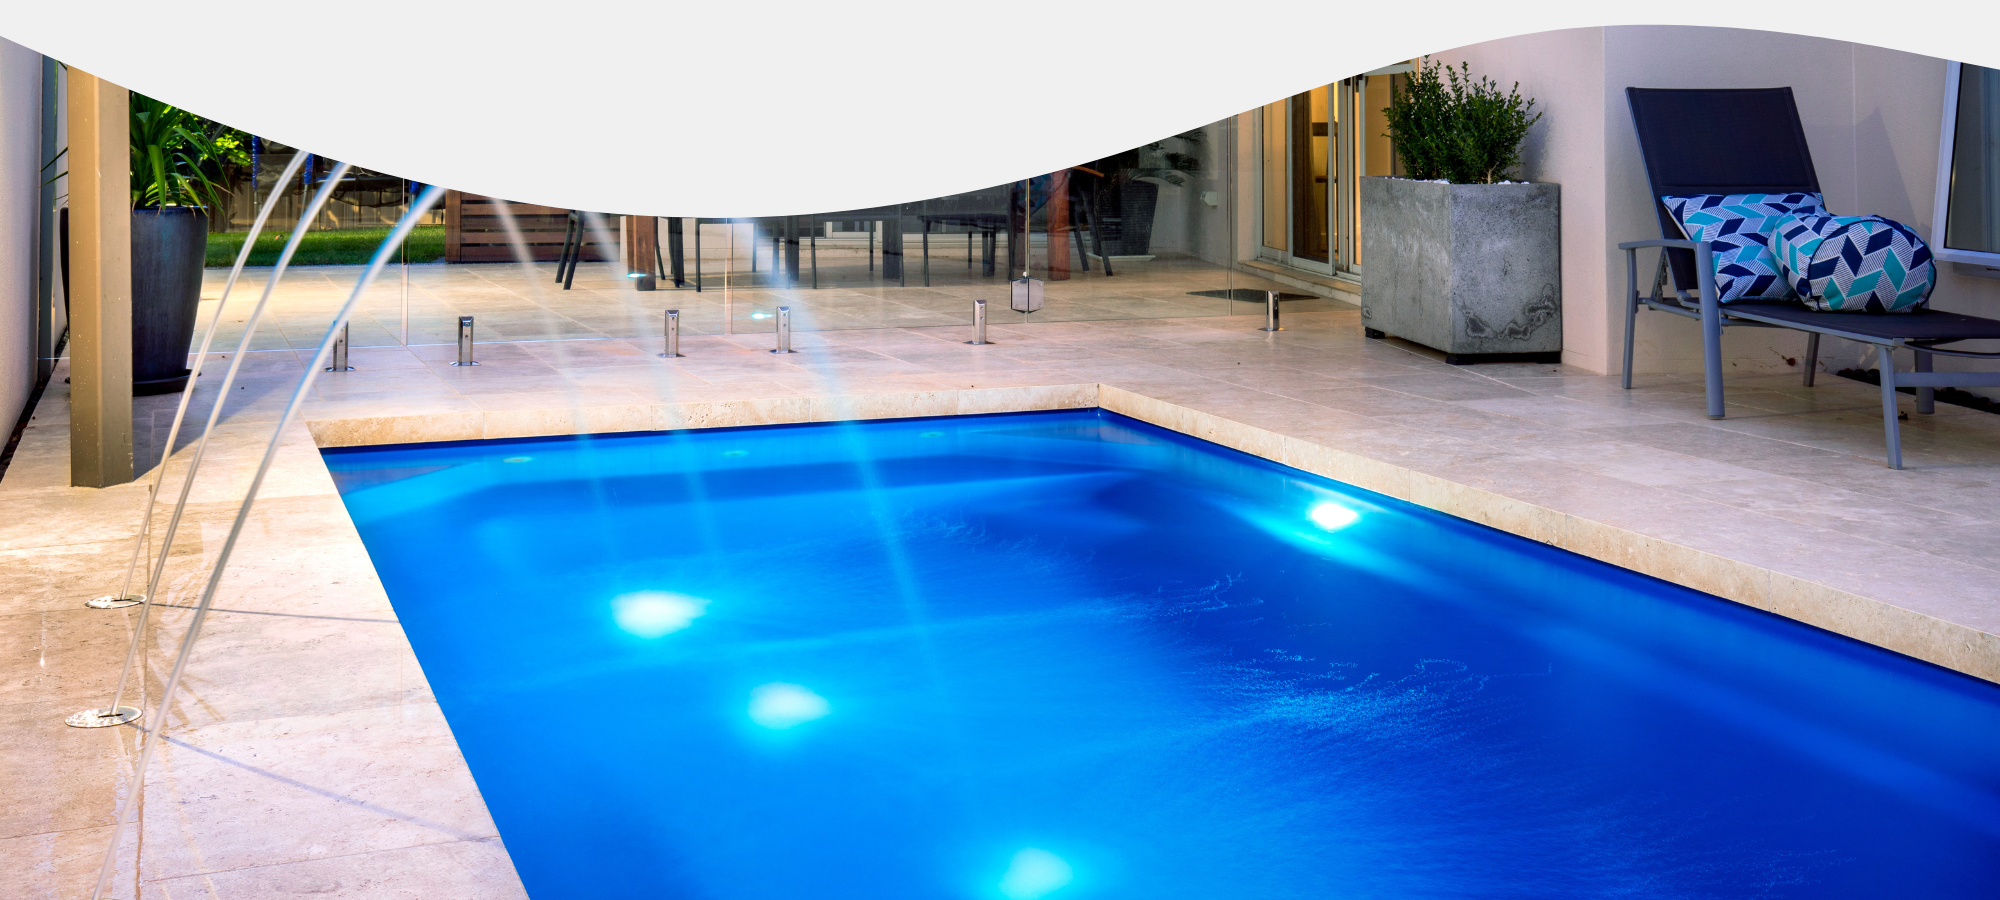 large inground pool with lighting features